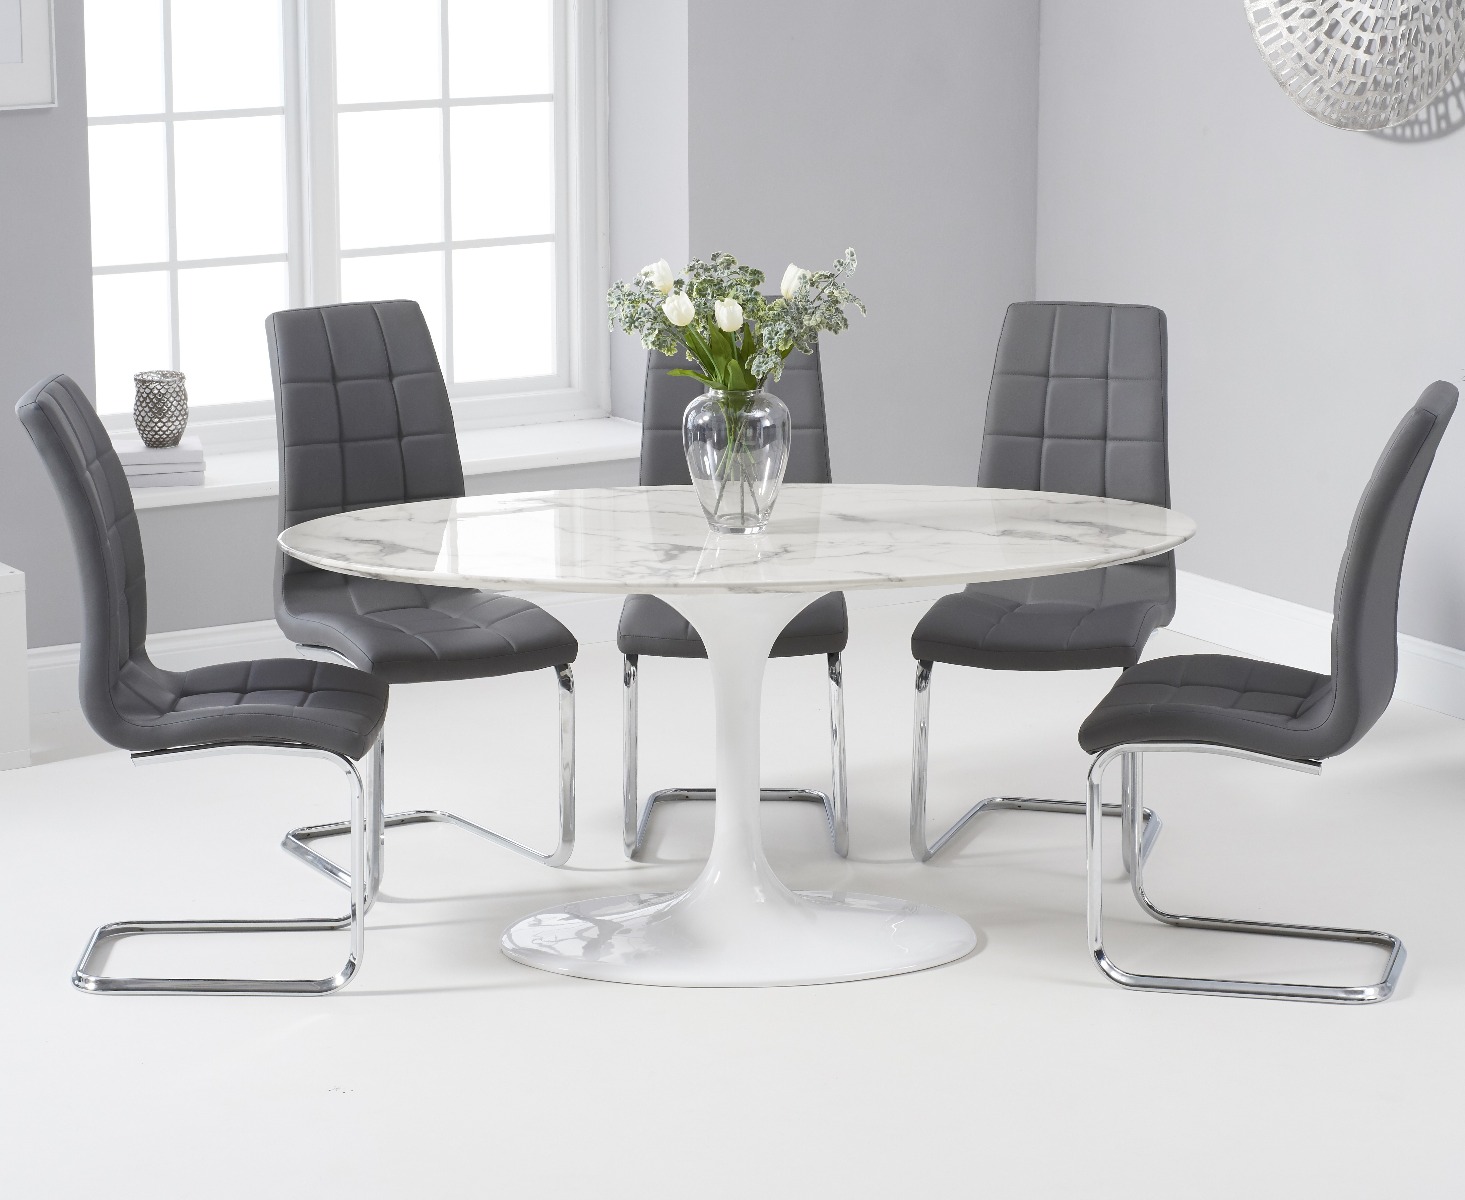 Brighton 160cm Oval White Marble Dining Table With 4 White Vigo Dining Chairs